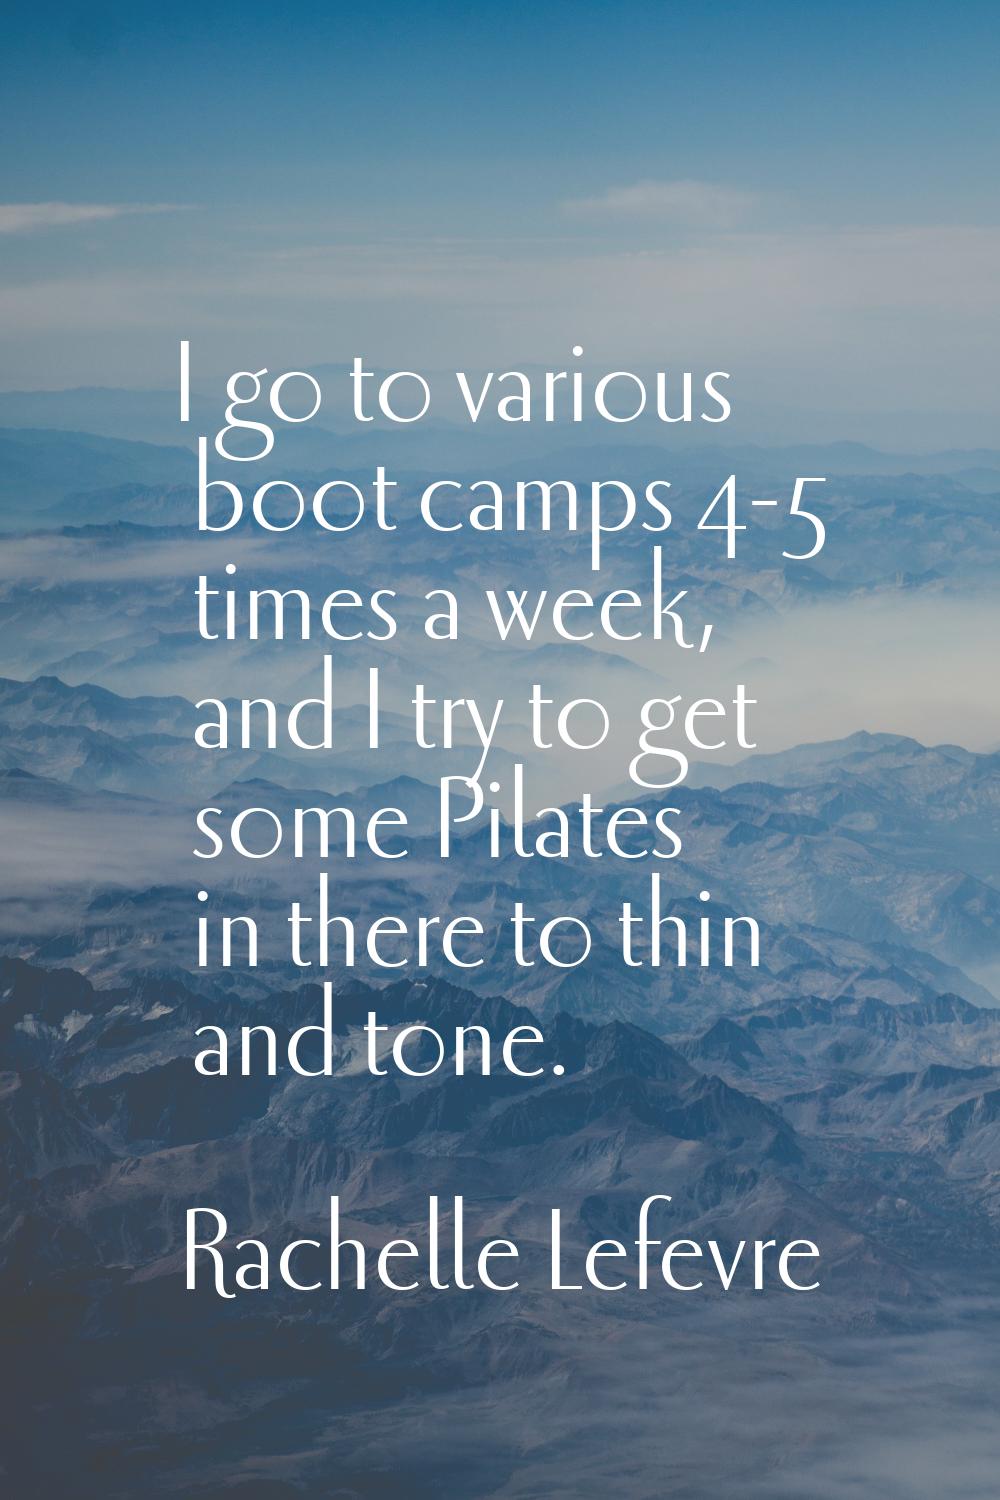 I go to various boot camps 4-5 times a week, and I try to get some Pilates in there to thin and ton